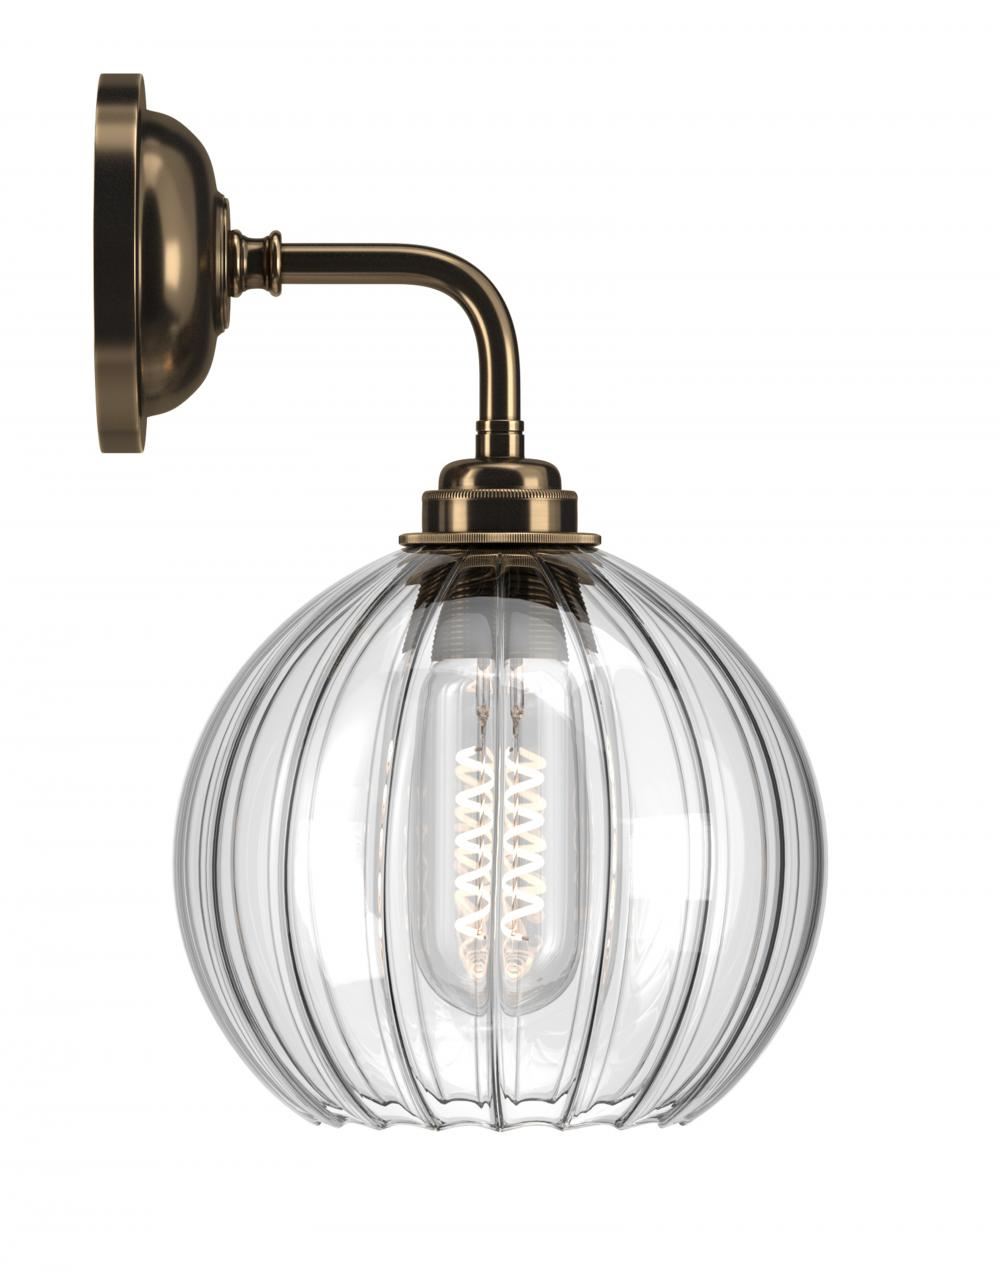 Hereford Globe Wall Light Ribbed Antique Brass